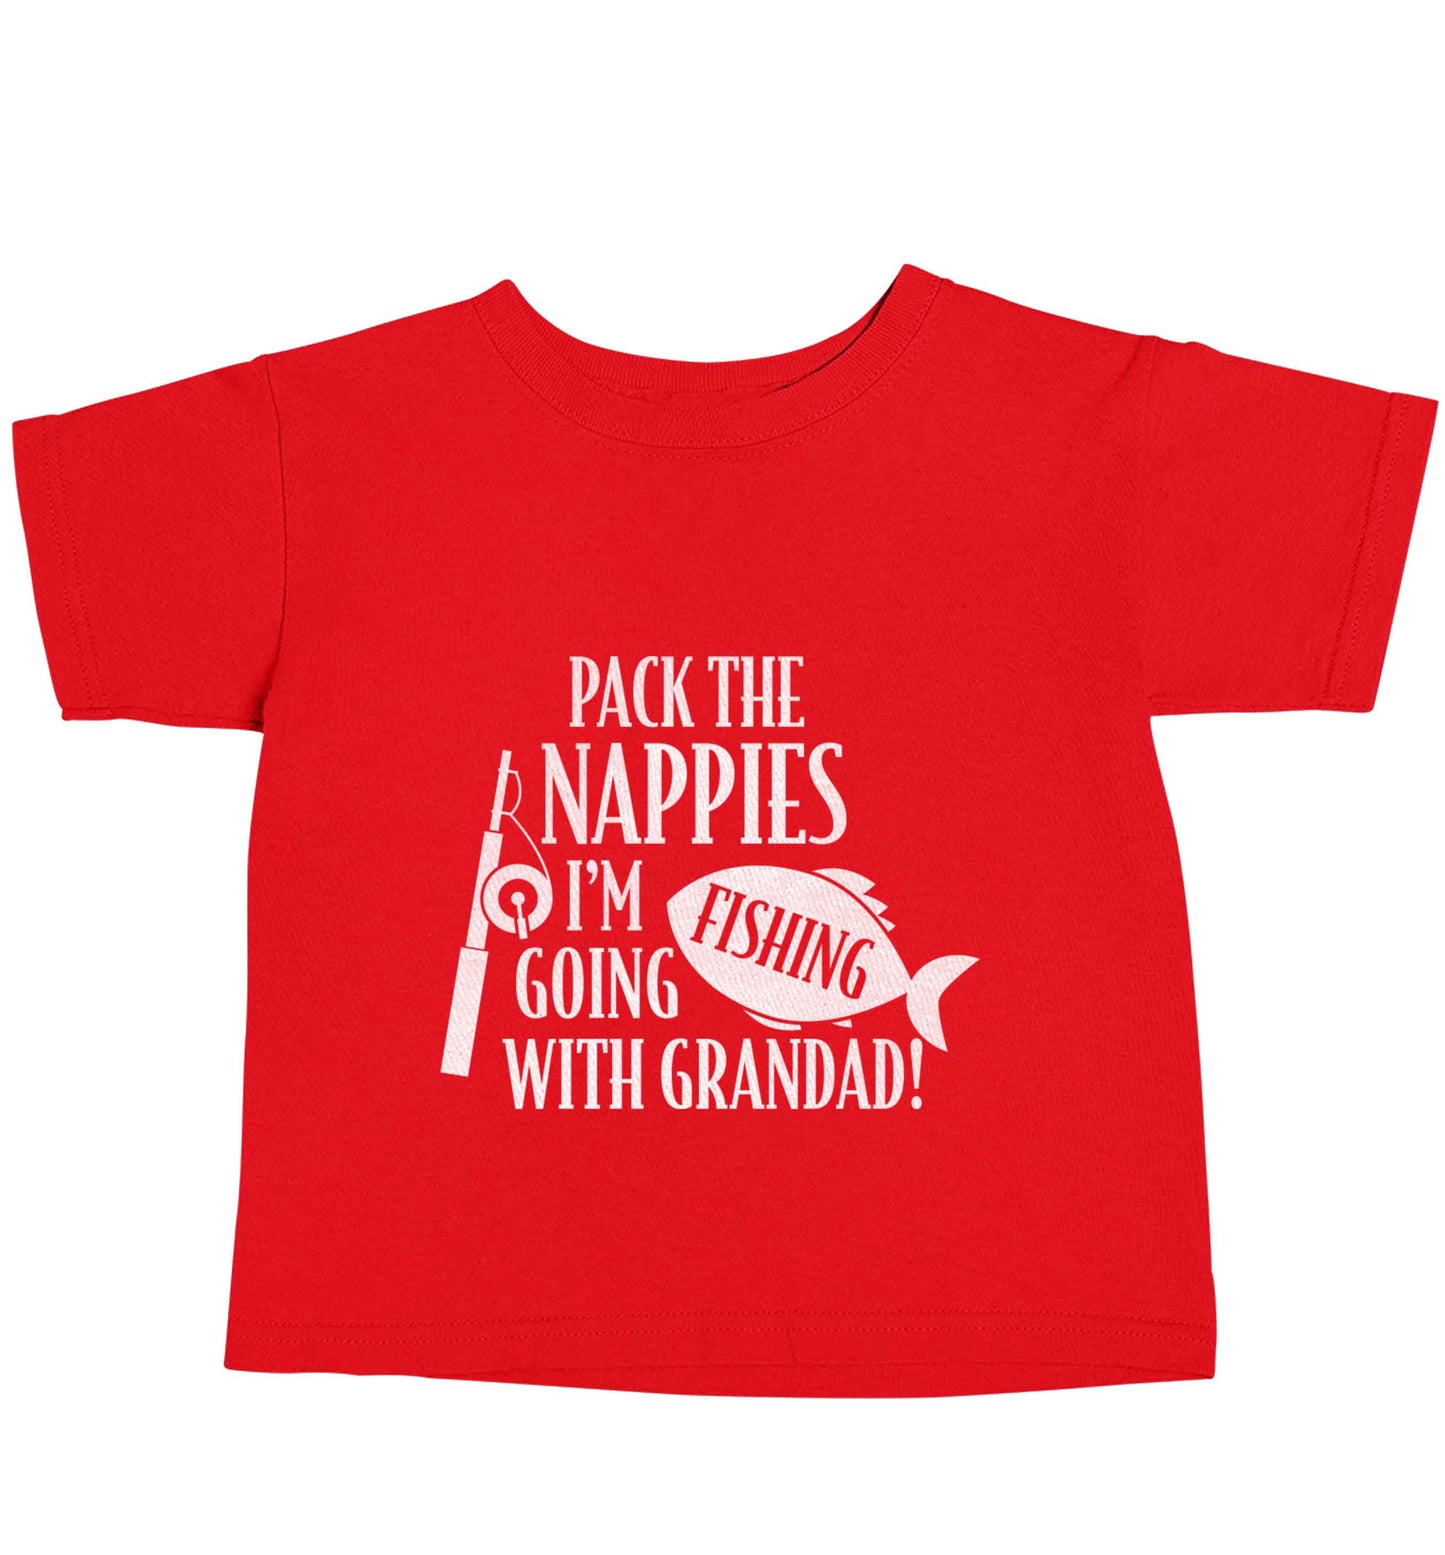 Pack the nappies I'm going fishing with Grandad red baby toddler Tshirt 2 Years